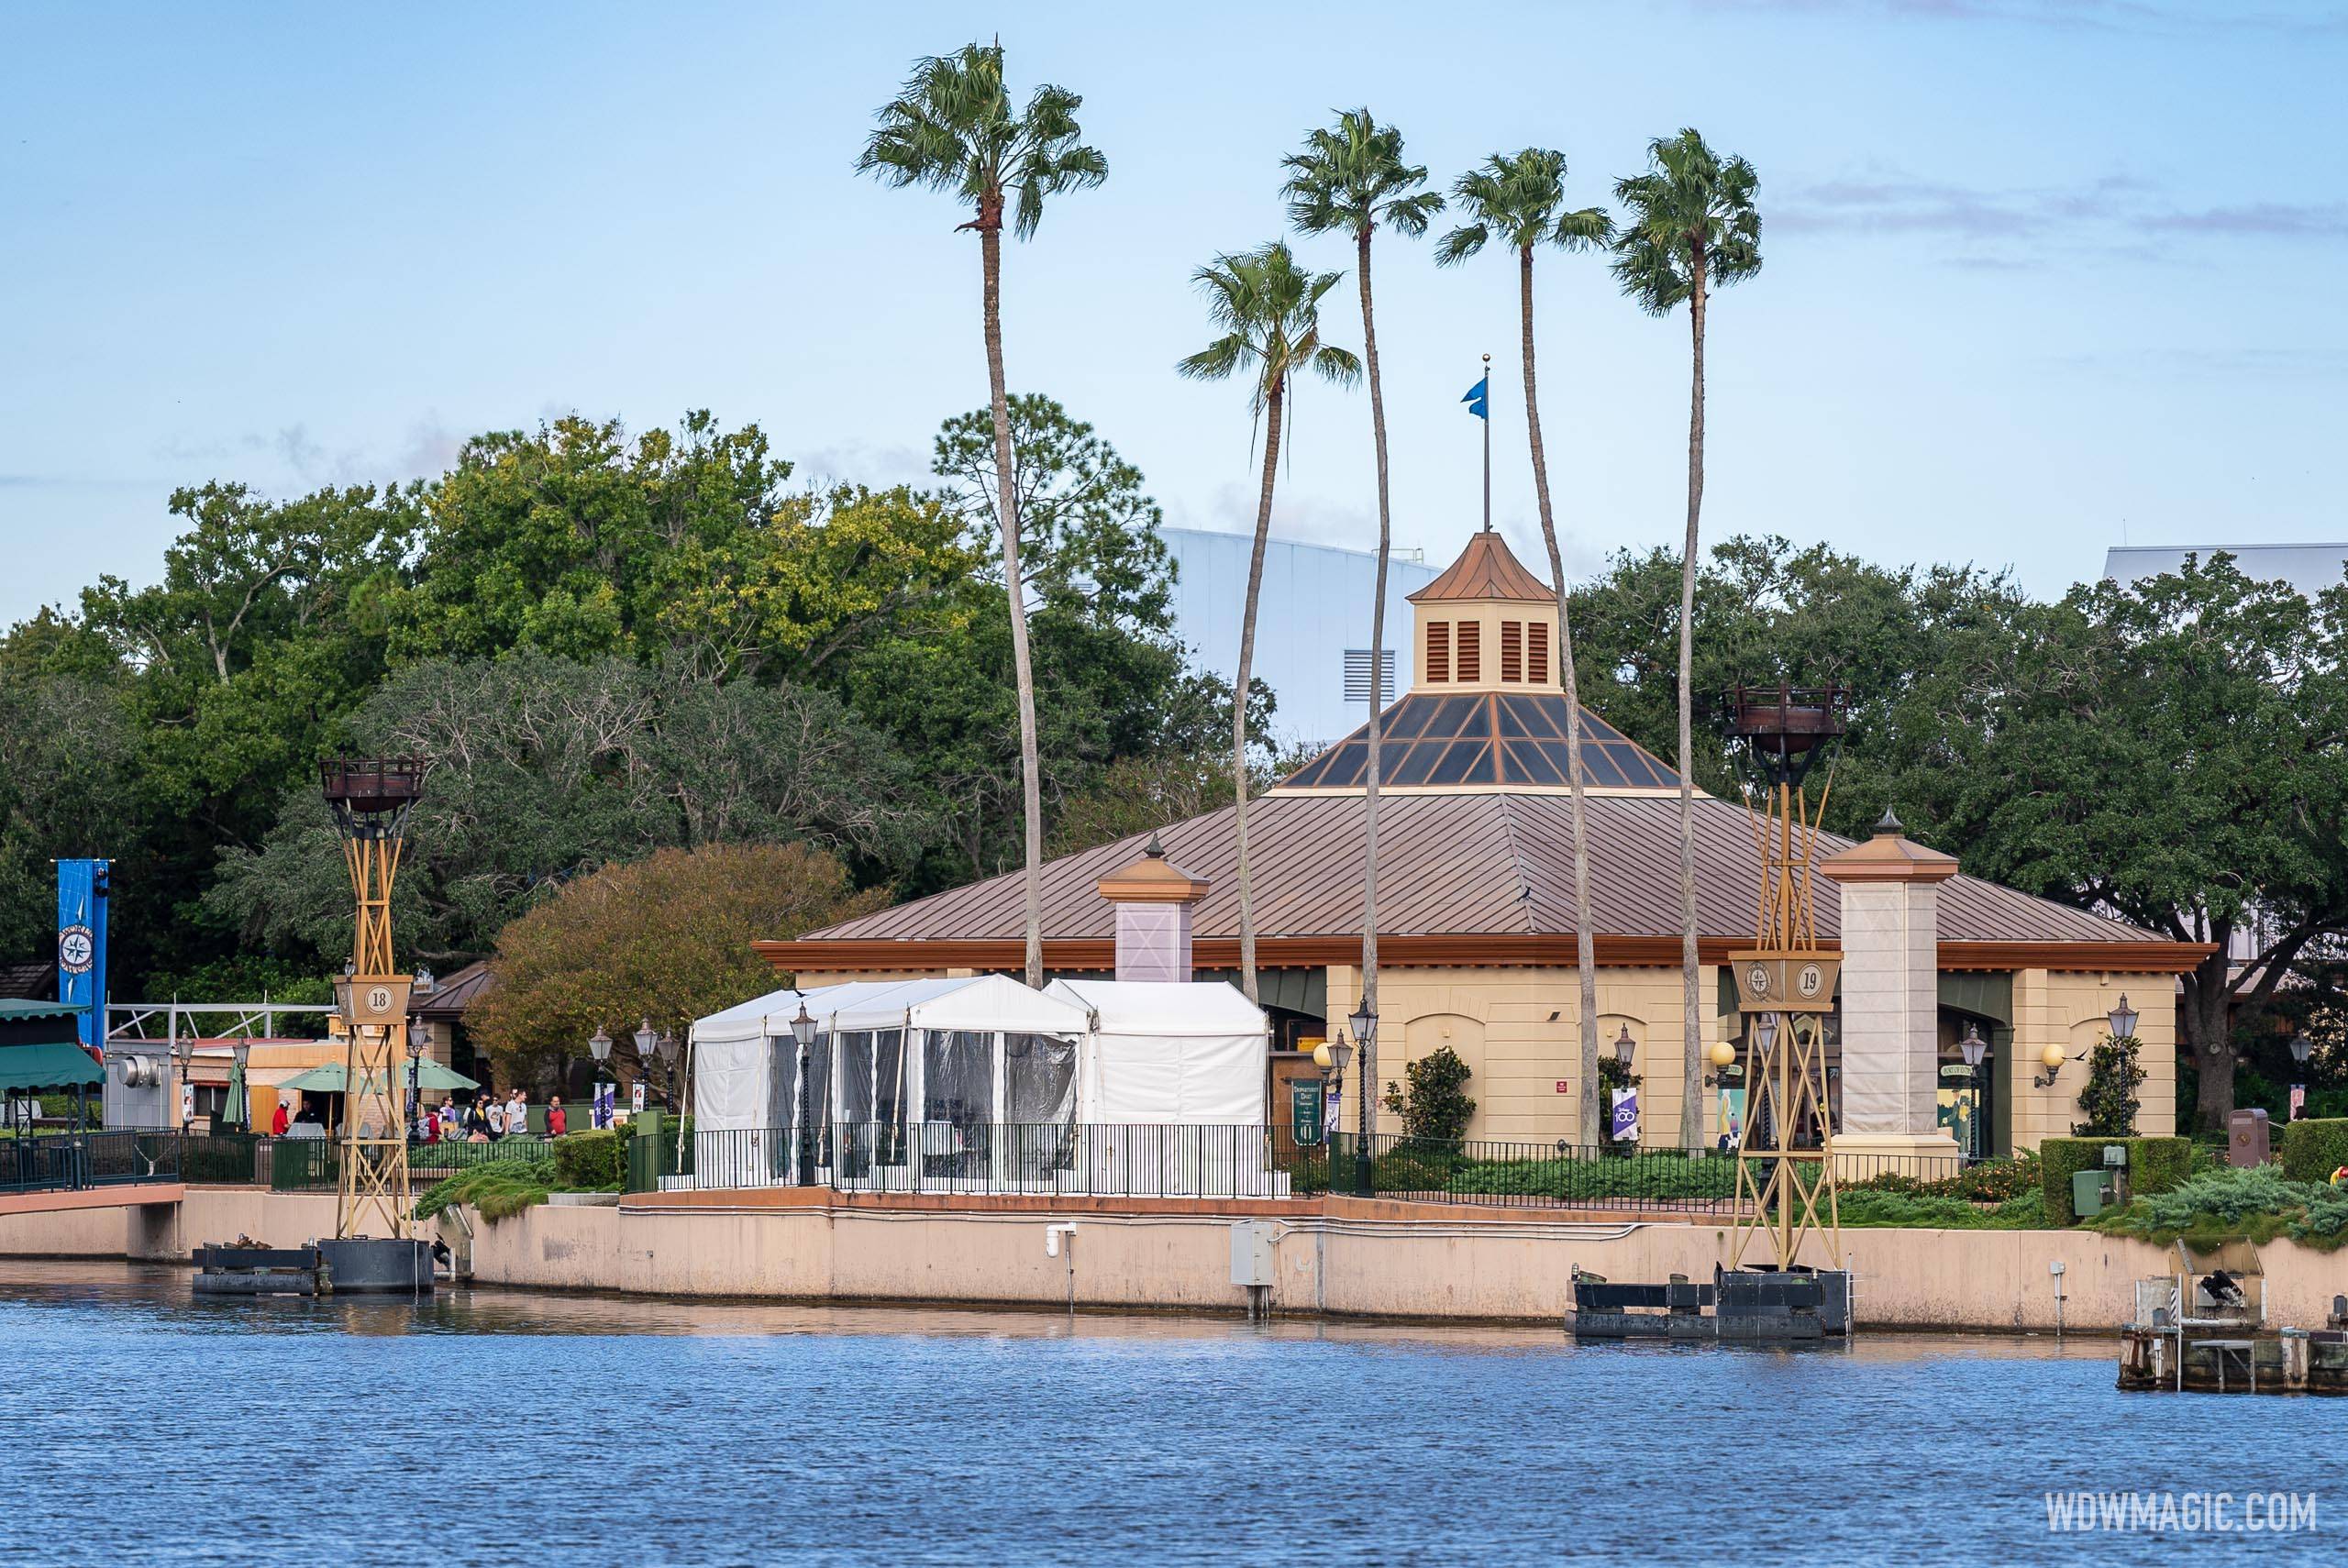 Programming hardware for 'Luminous The Symphony of Us' arrives in World Showcase at EPCOT